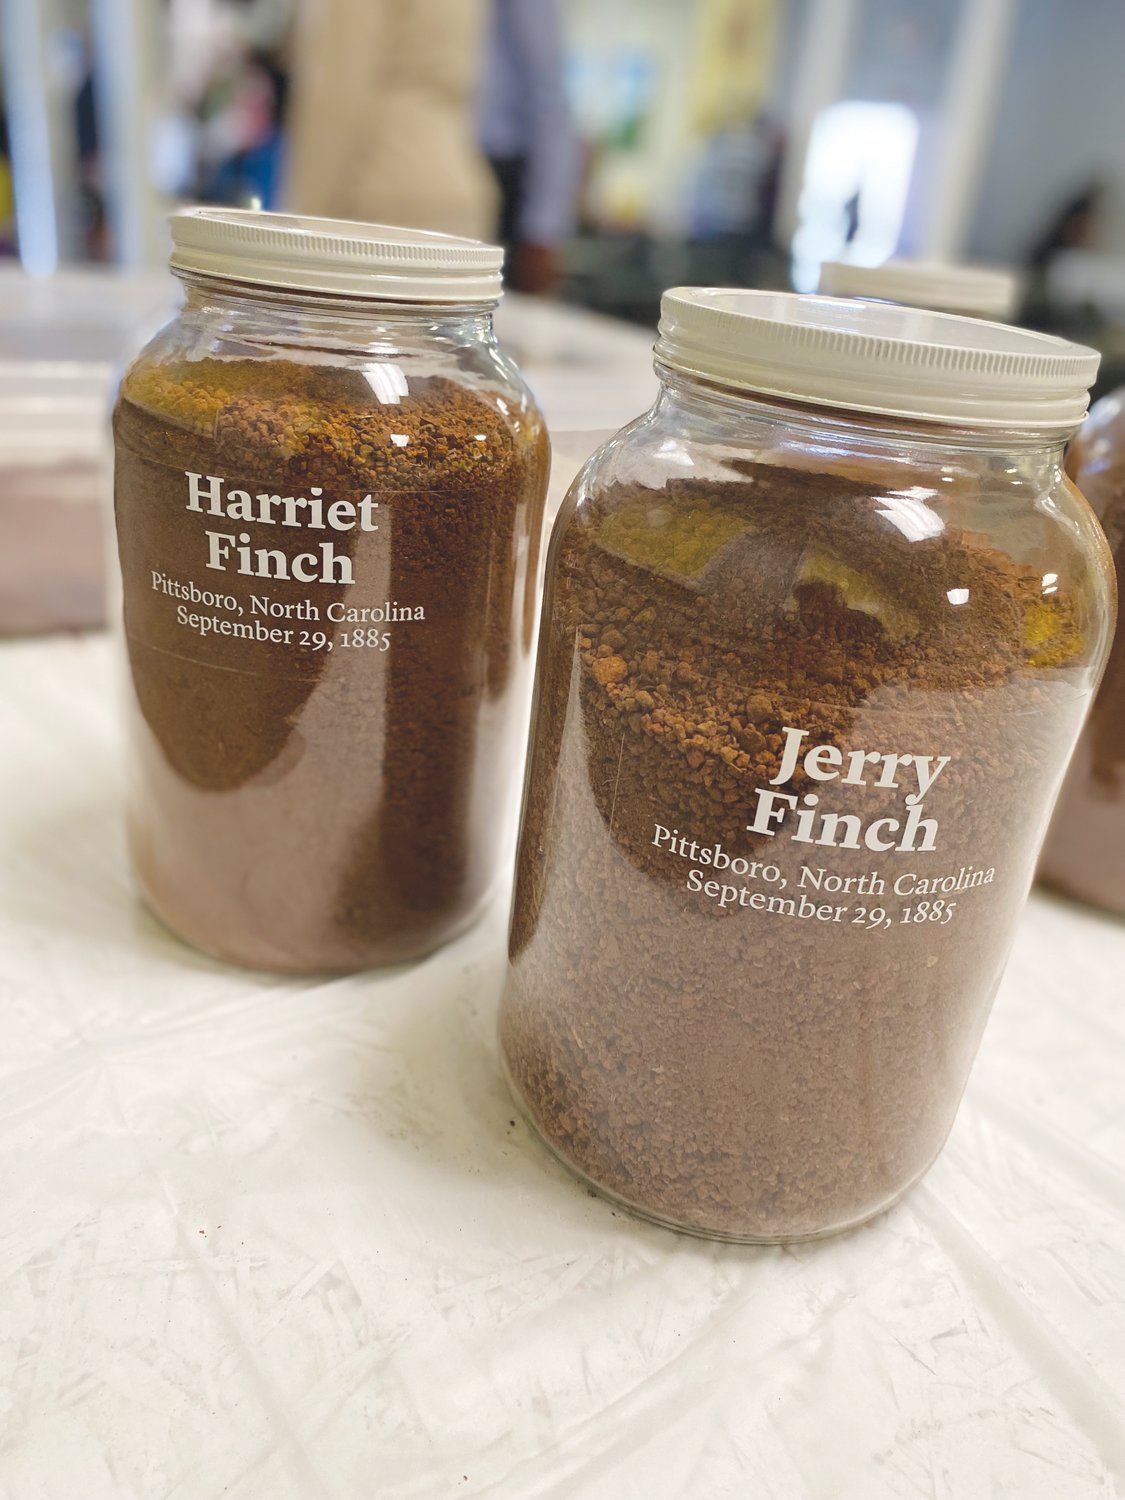 The fill jars memorializing Harriet and Jerry Finch, who were lynched in Pittsboro on Sept. 29, 1885.